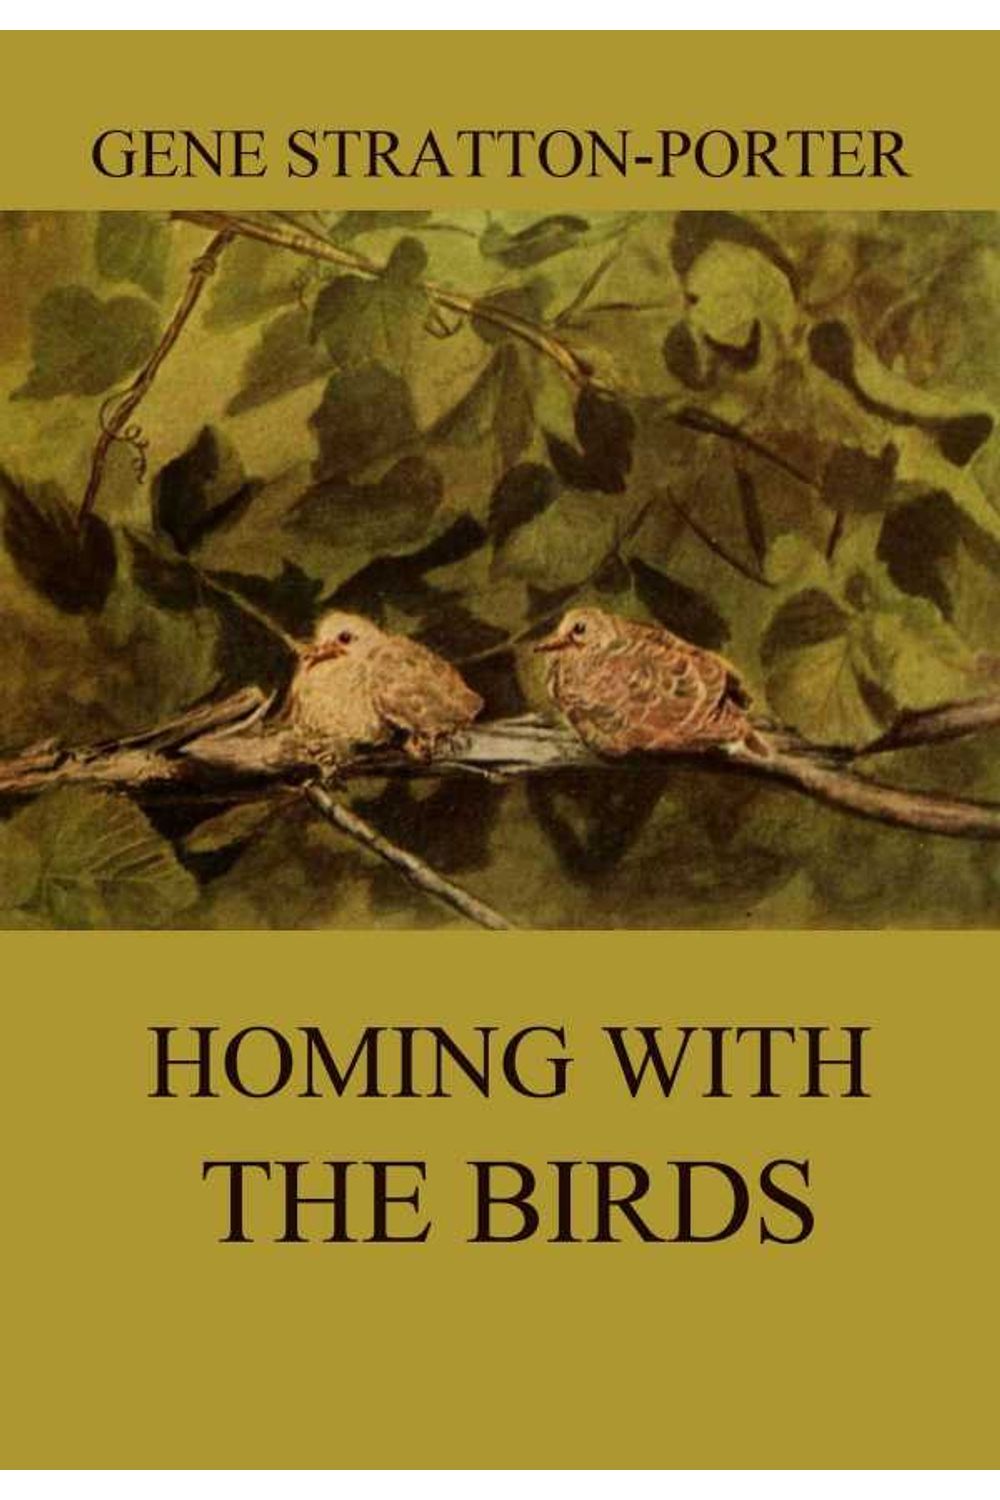 bw-homing-with-the-birds-jazzybee-verlag-9783849648688